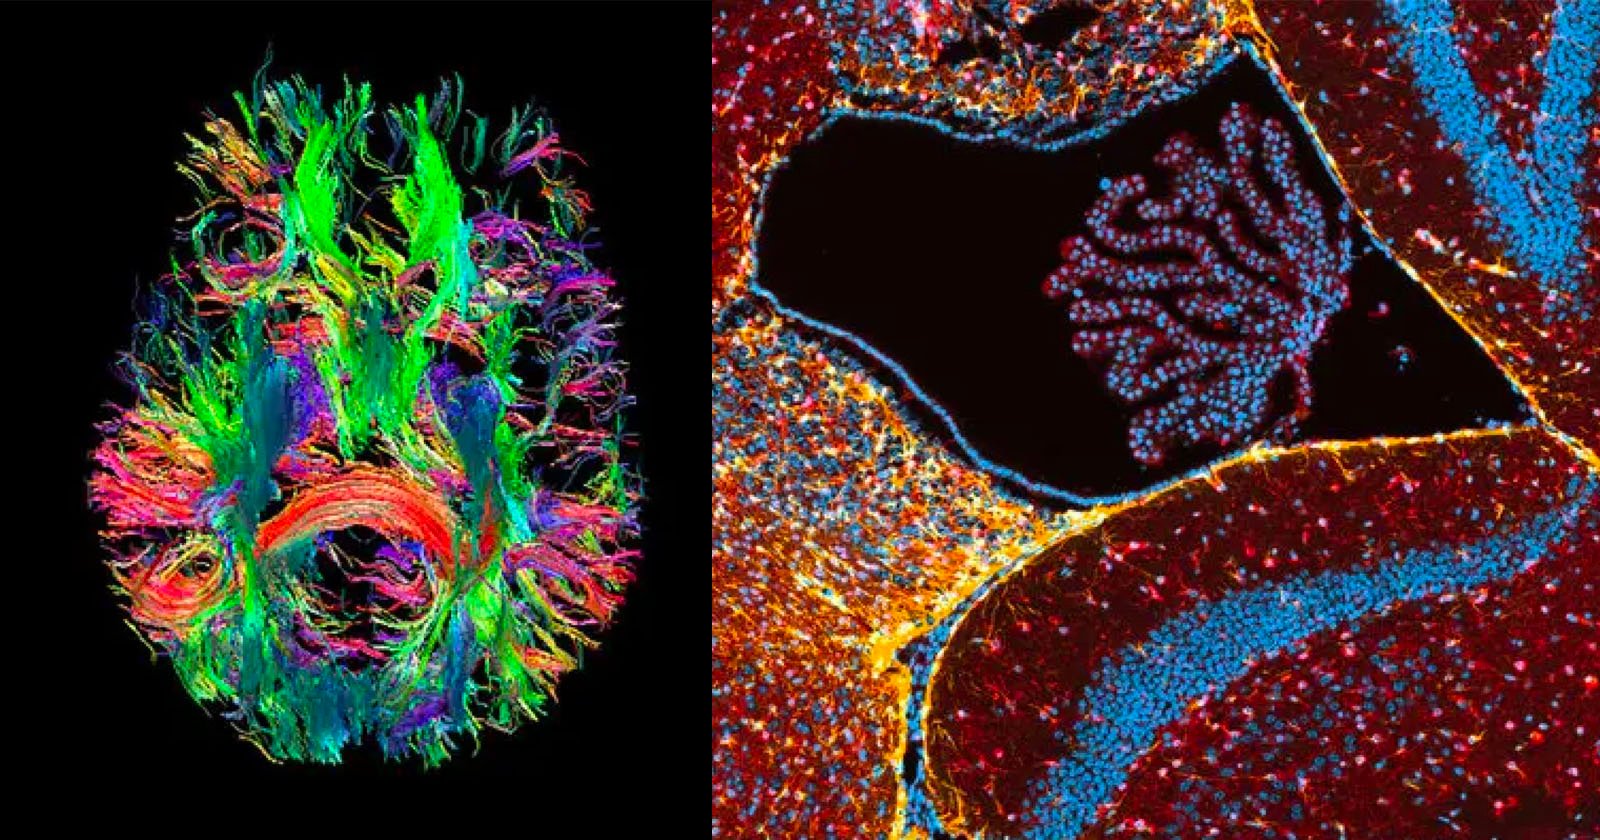 Mind-Blowing Images From the Field of Neuroscience